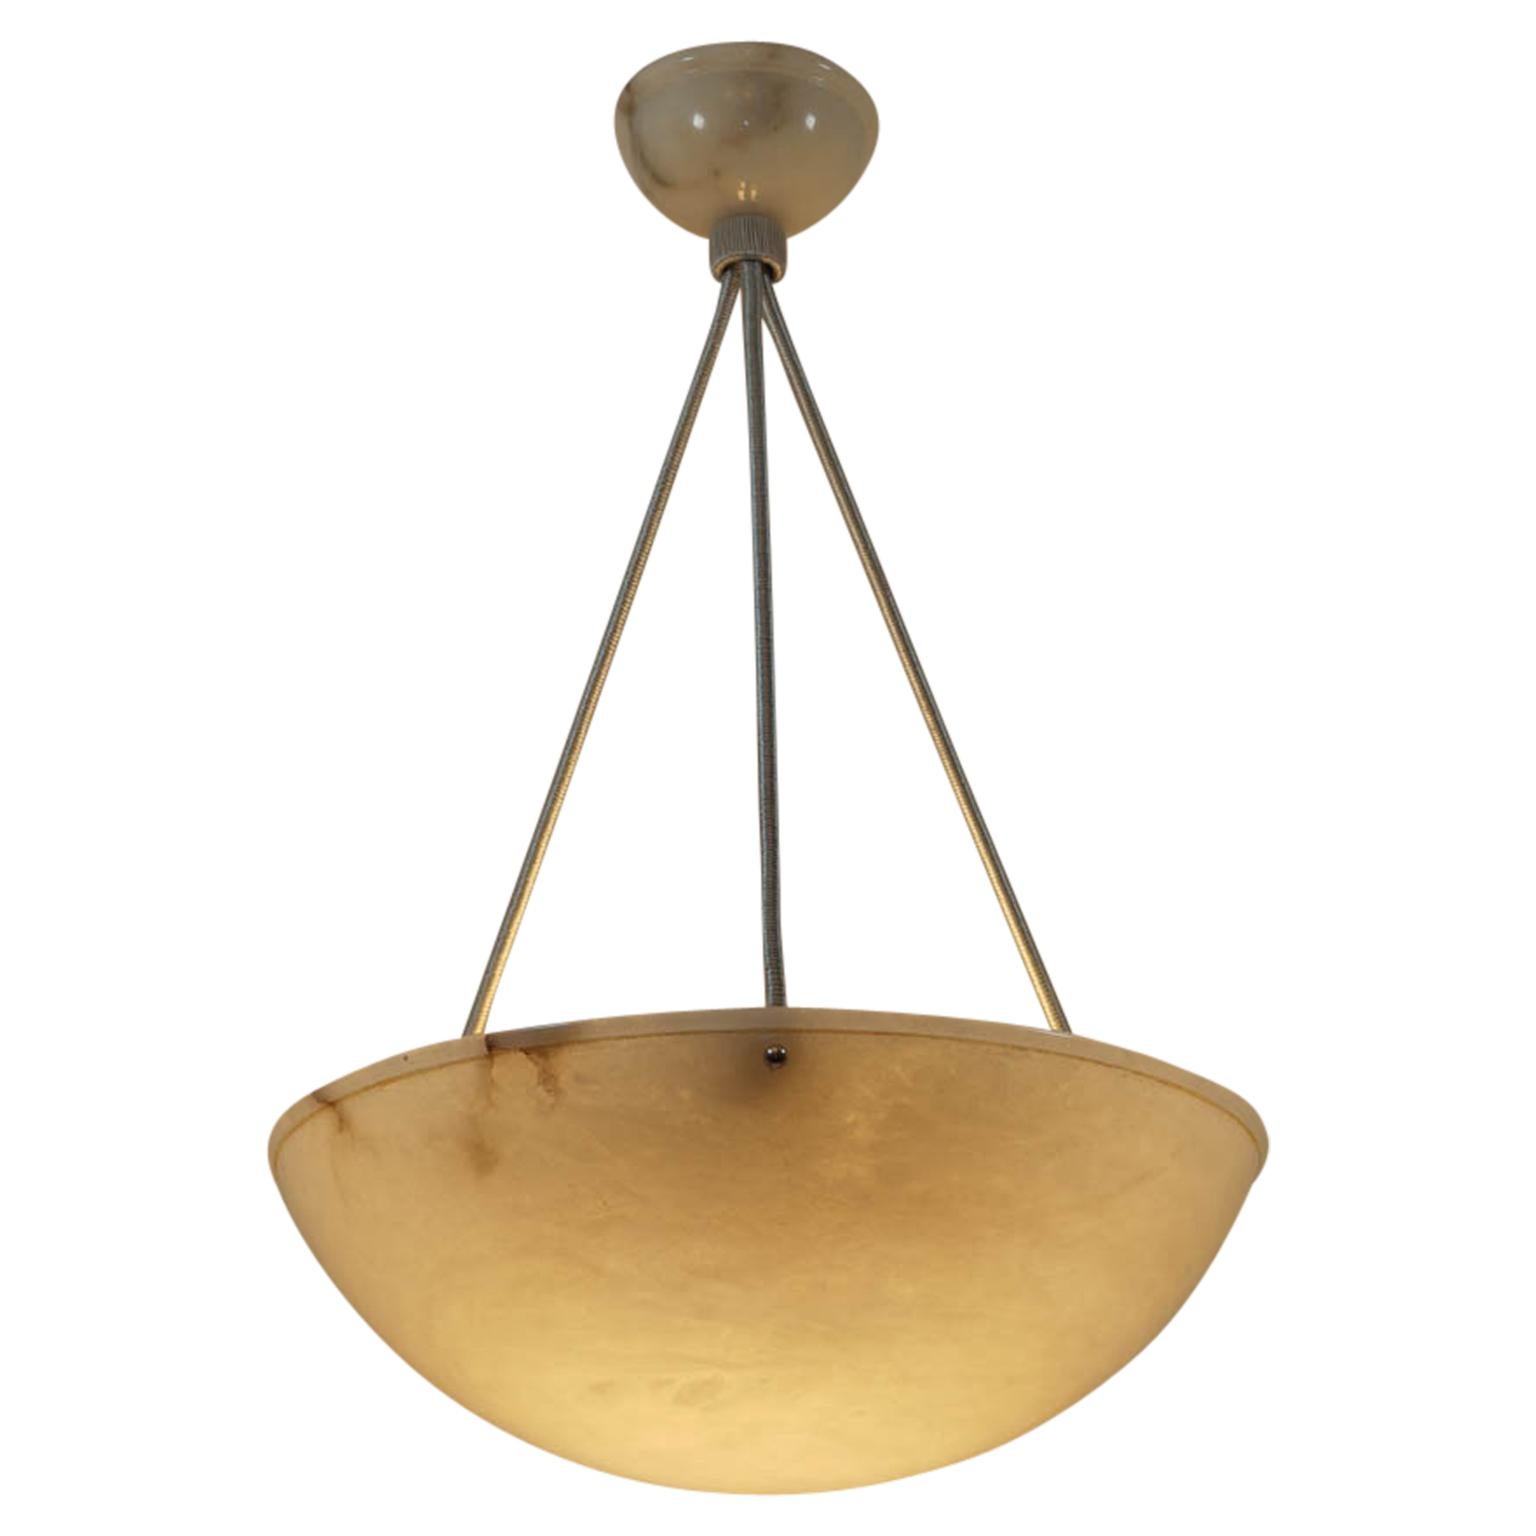 A highly mineralized alabaster shade has been carved into a bowl with rim shape and a matching ceiling canopy.